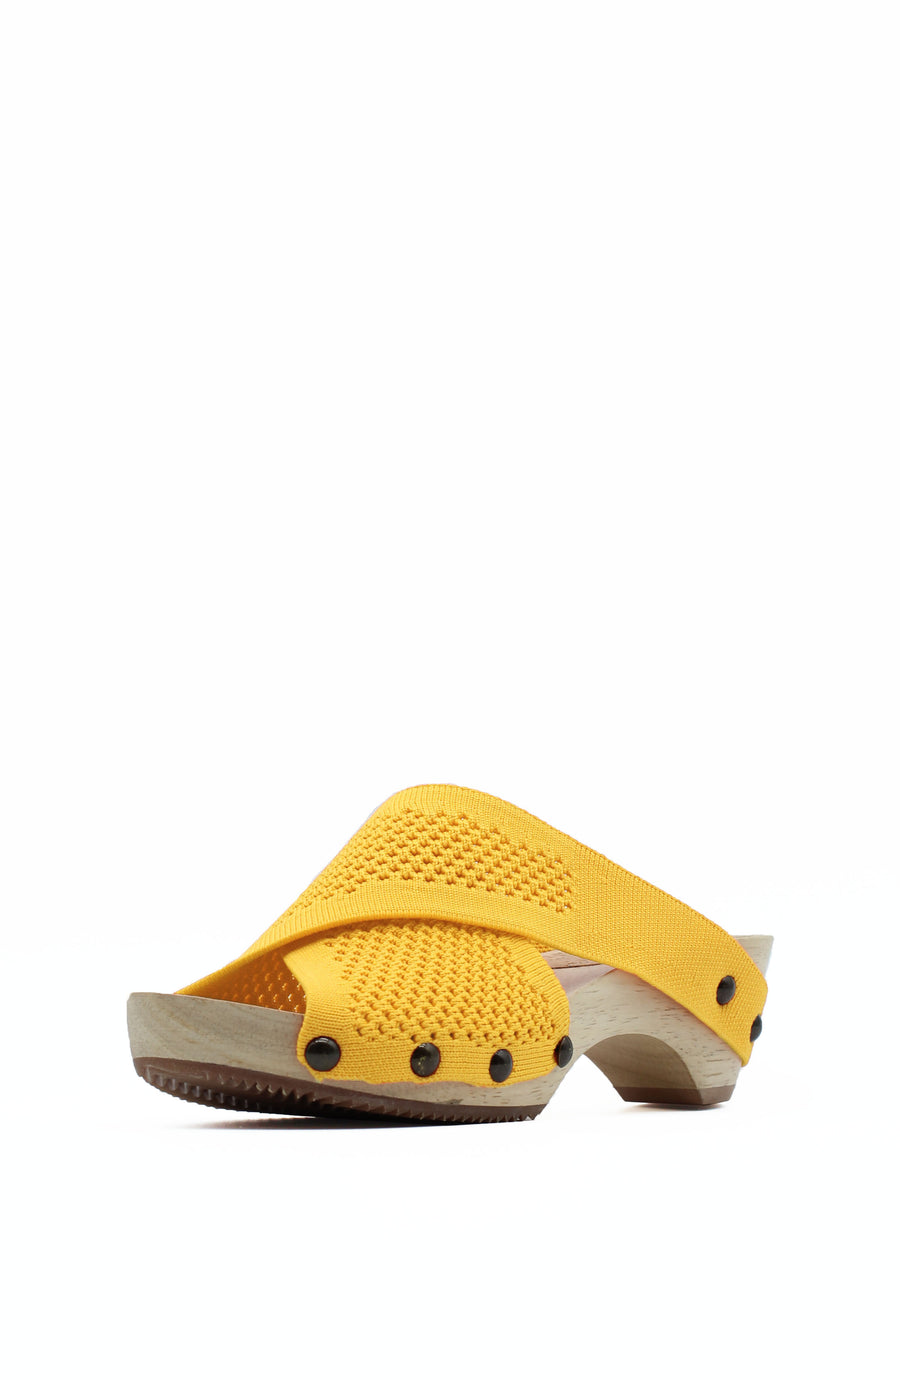 CLEARANCE - LIBBY HILL in BRIGHT YELLOW